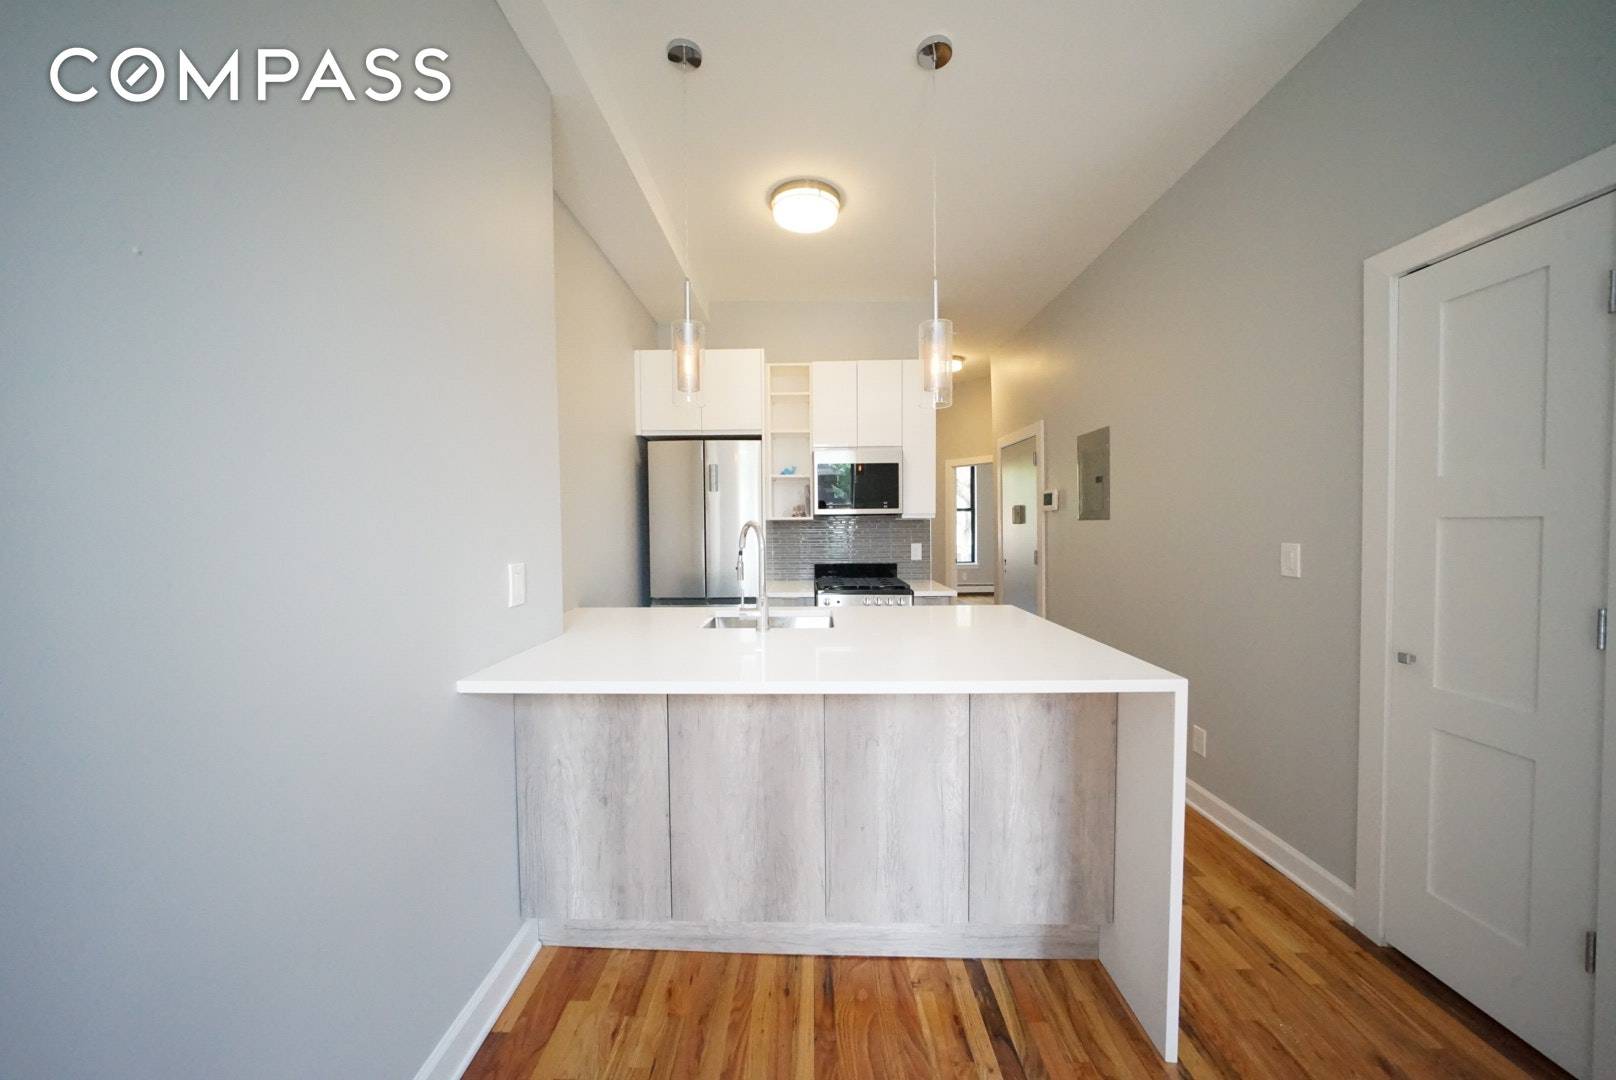 572 Myrtle Avenue is a brand new renovation featuring custom kitchen with huge quartz island and breakfast bar, stainless steel appliance package including dishwasher, and custom details throughout.